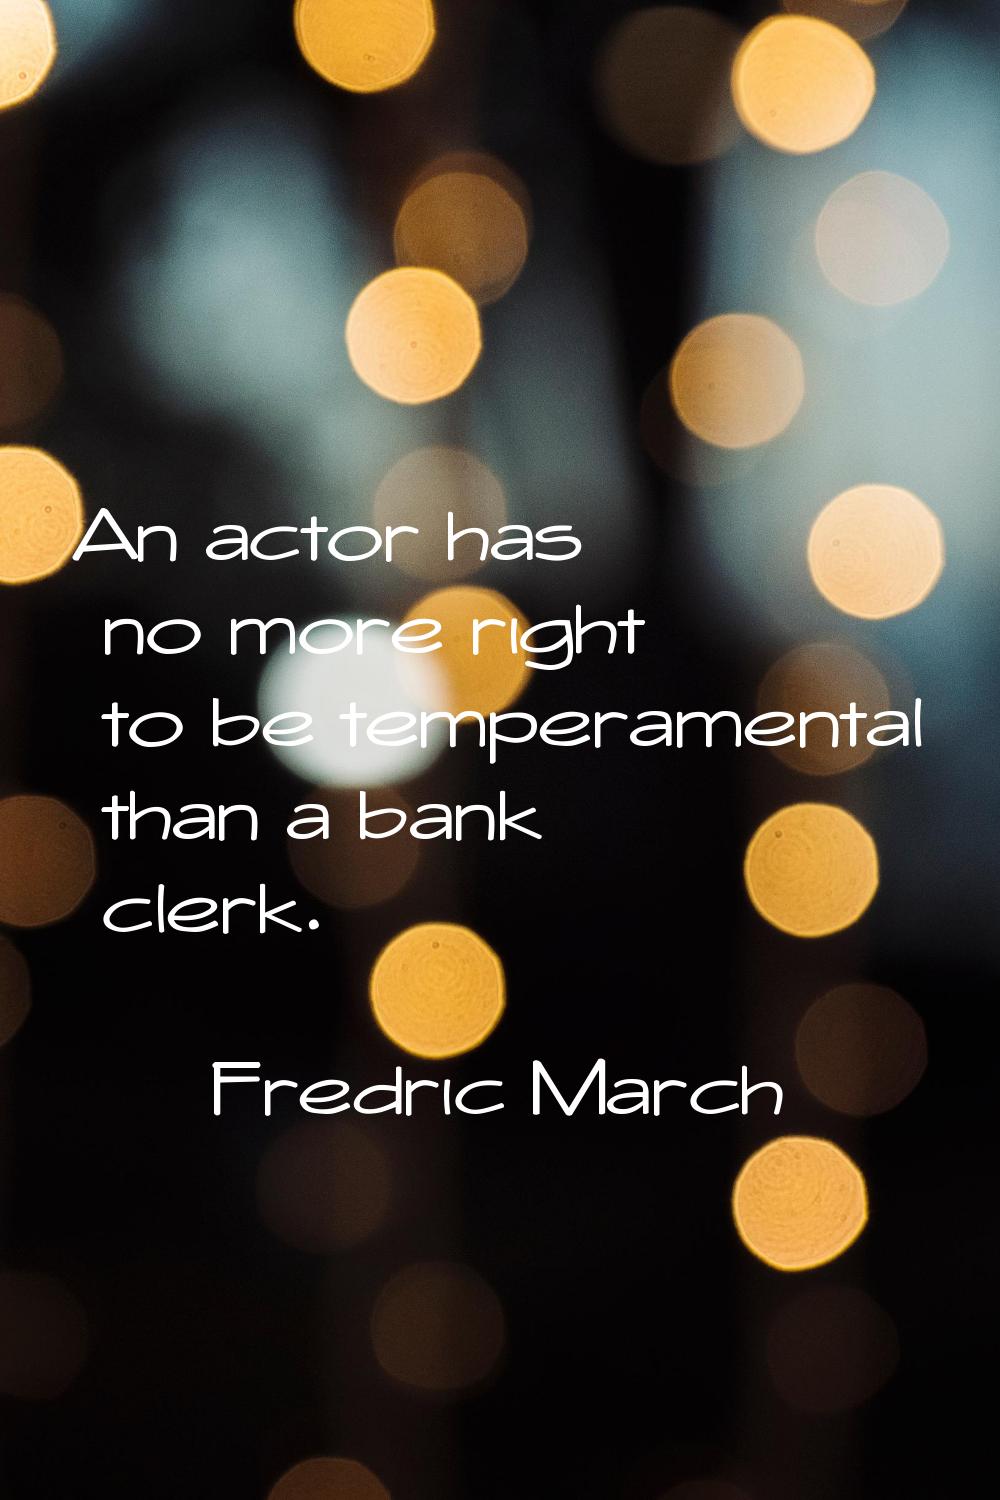 An actor has no more right to be temperamental than a bank clerk.